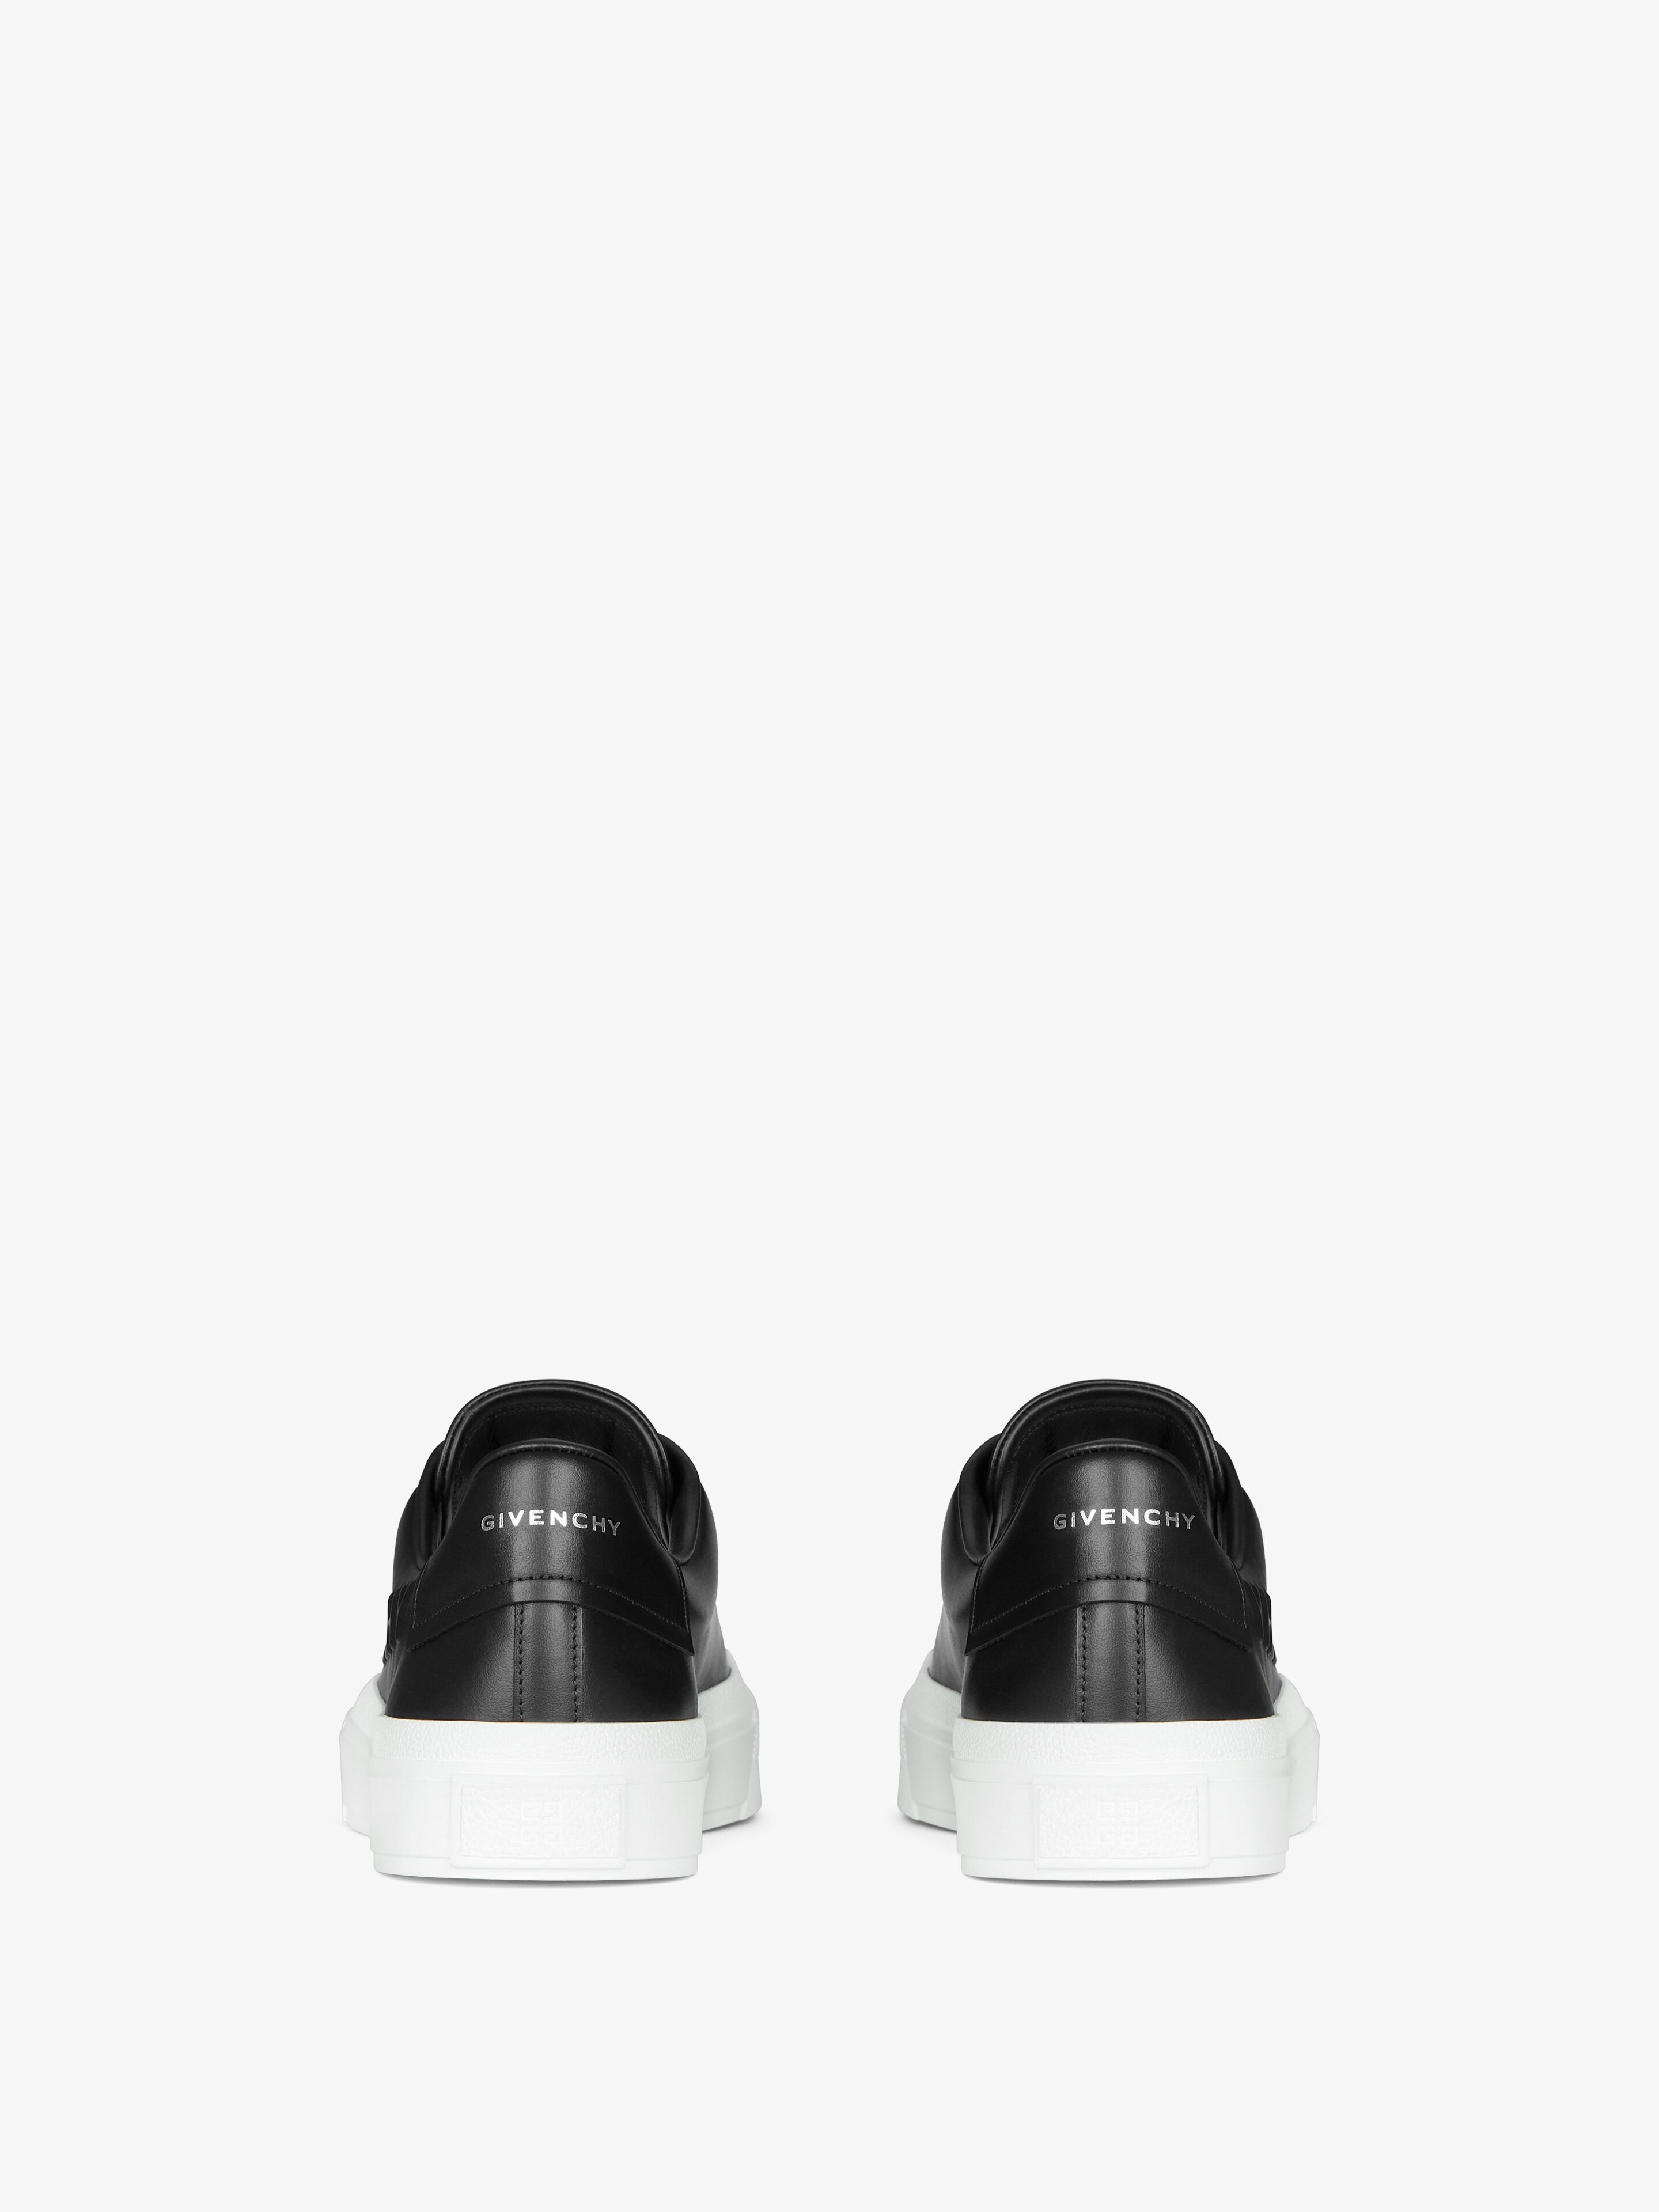 CITY SPORT SNEAKERS IN GIVENCHY LEATHER - 8